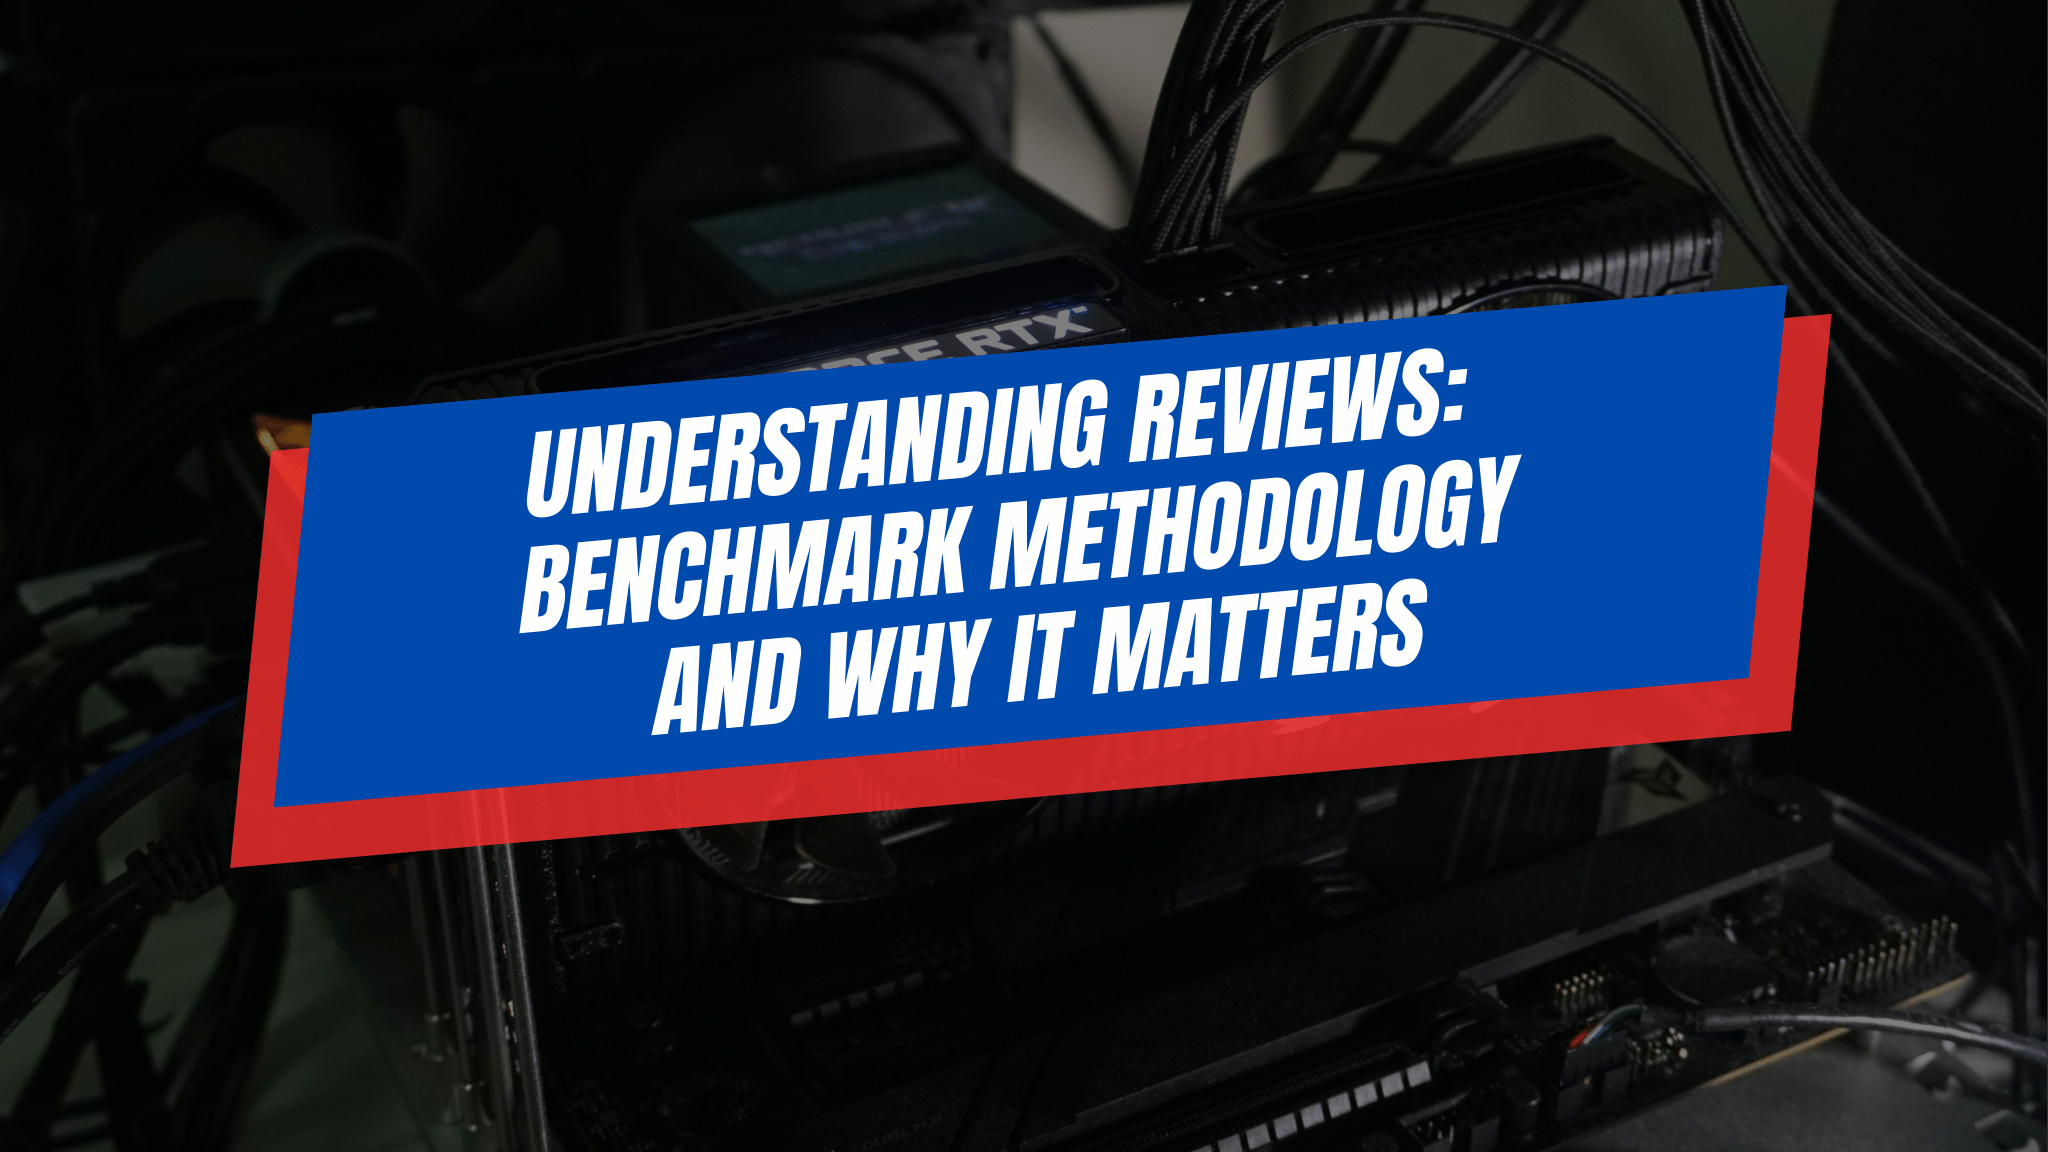 Understanding Reviews: Benchmark Methodology and Why It Matters